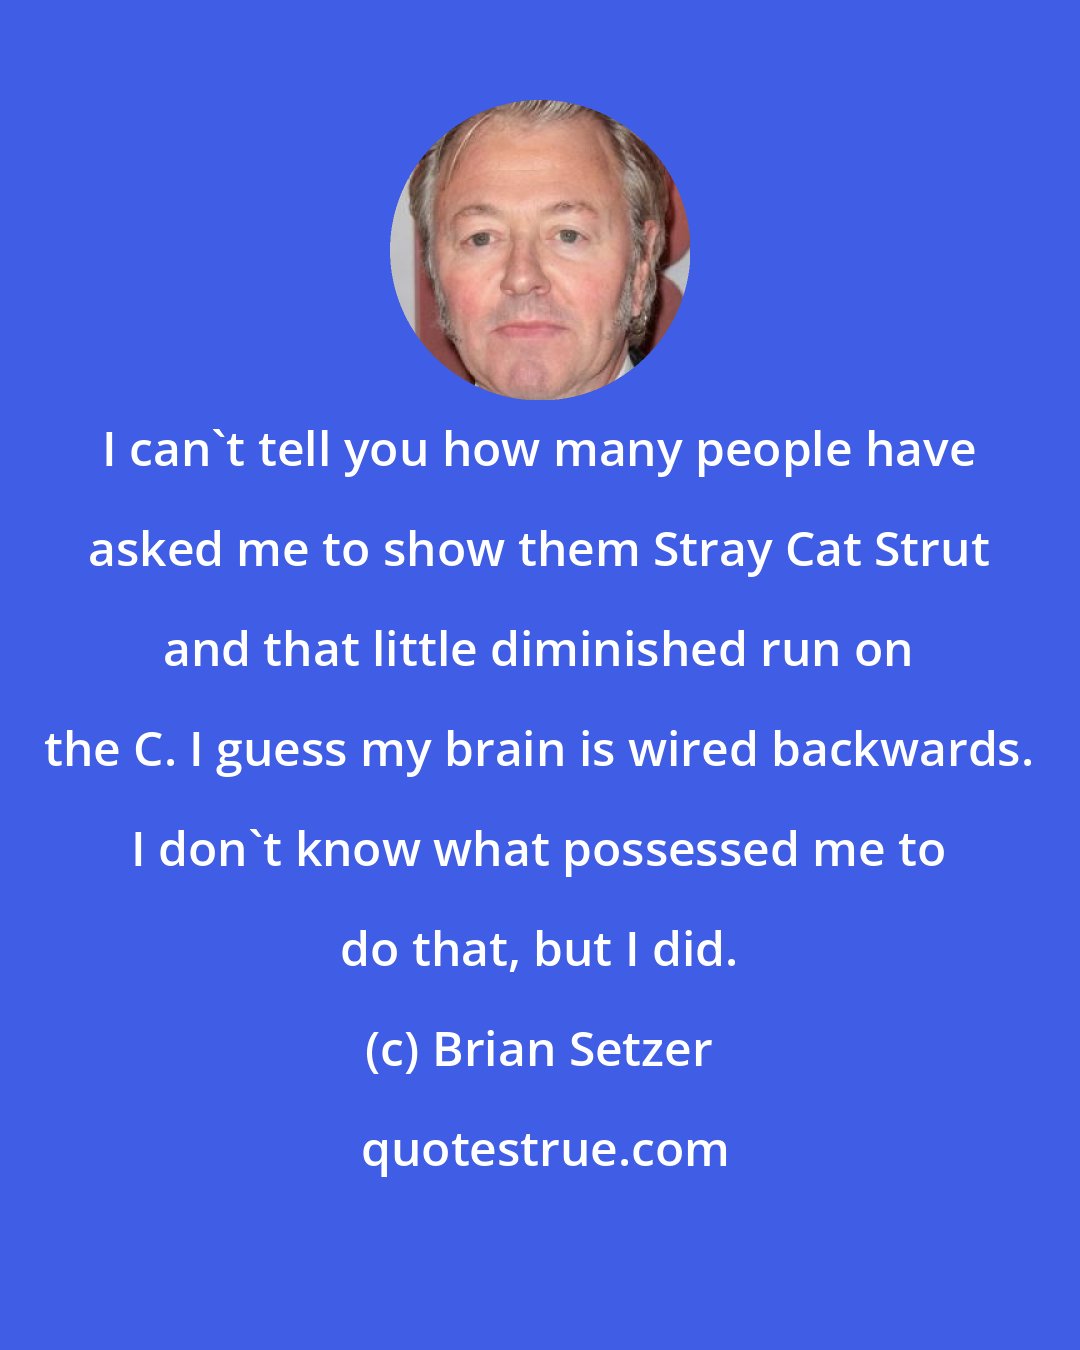 Brian Setzer: I can't tell you how many people have asked me to show them Stray Cat Strut and that little diminished run on the C. I guess my brain is wired backwards. I don't know what possessed me to do that, but I did.